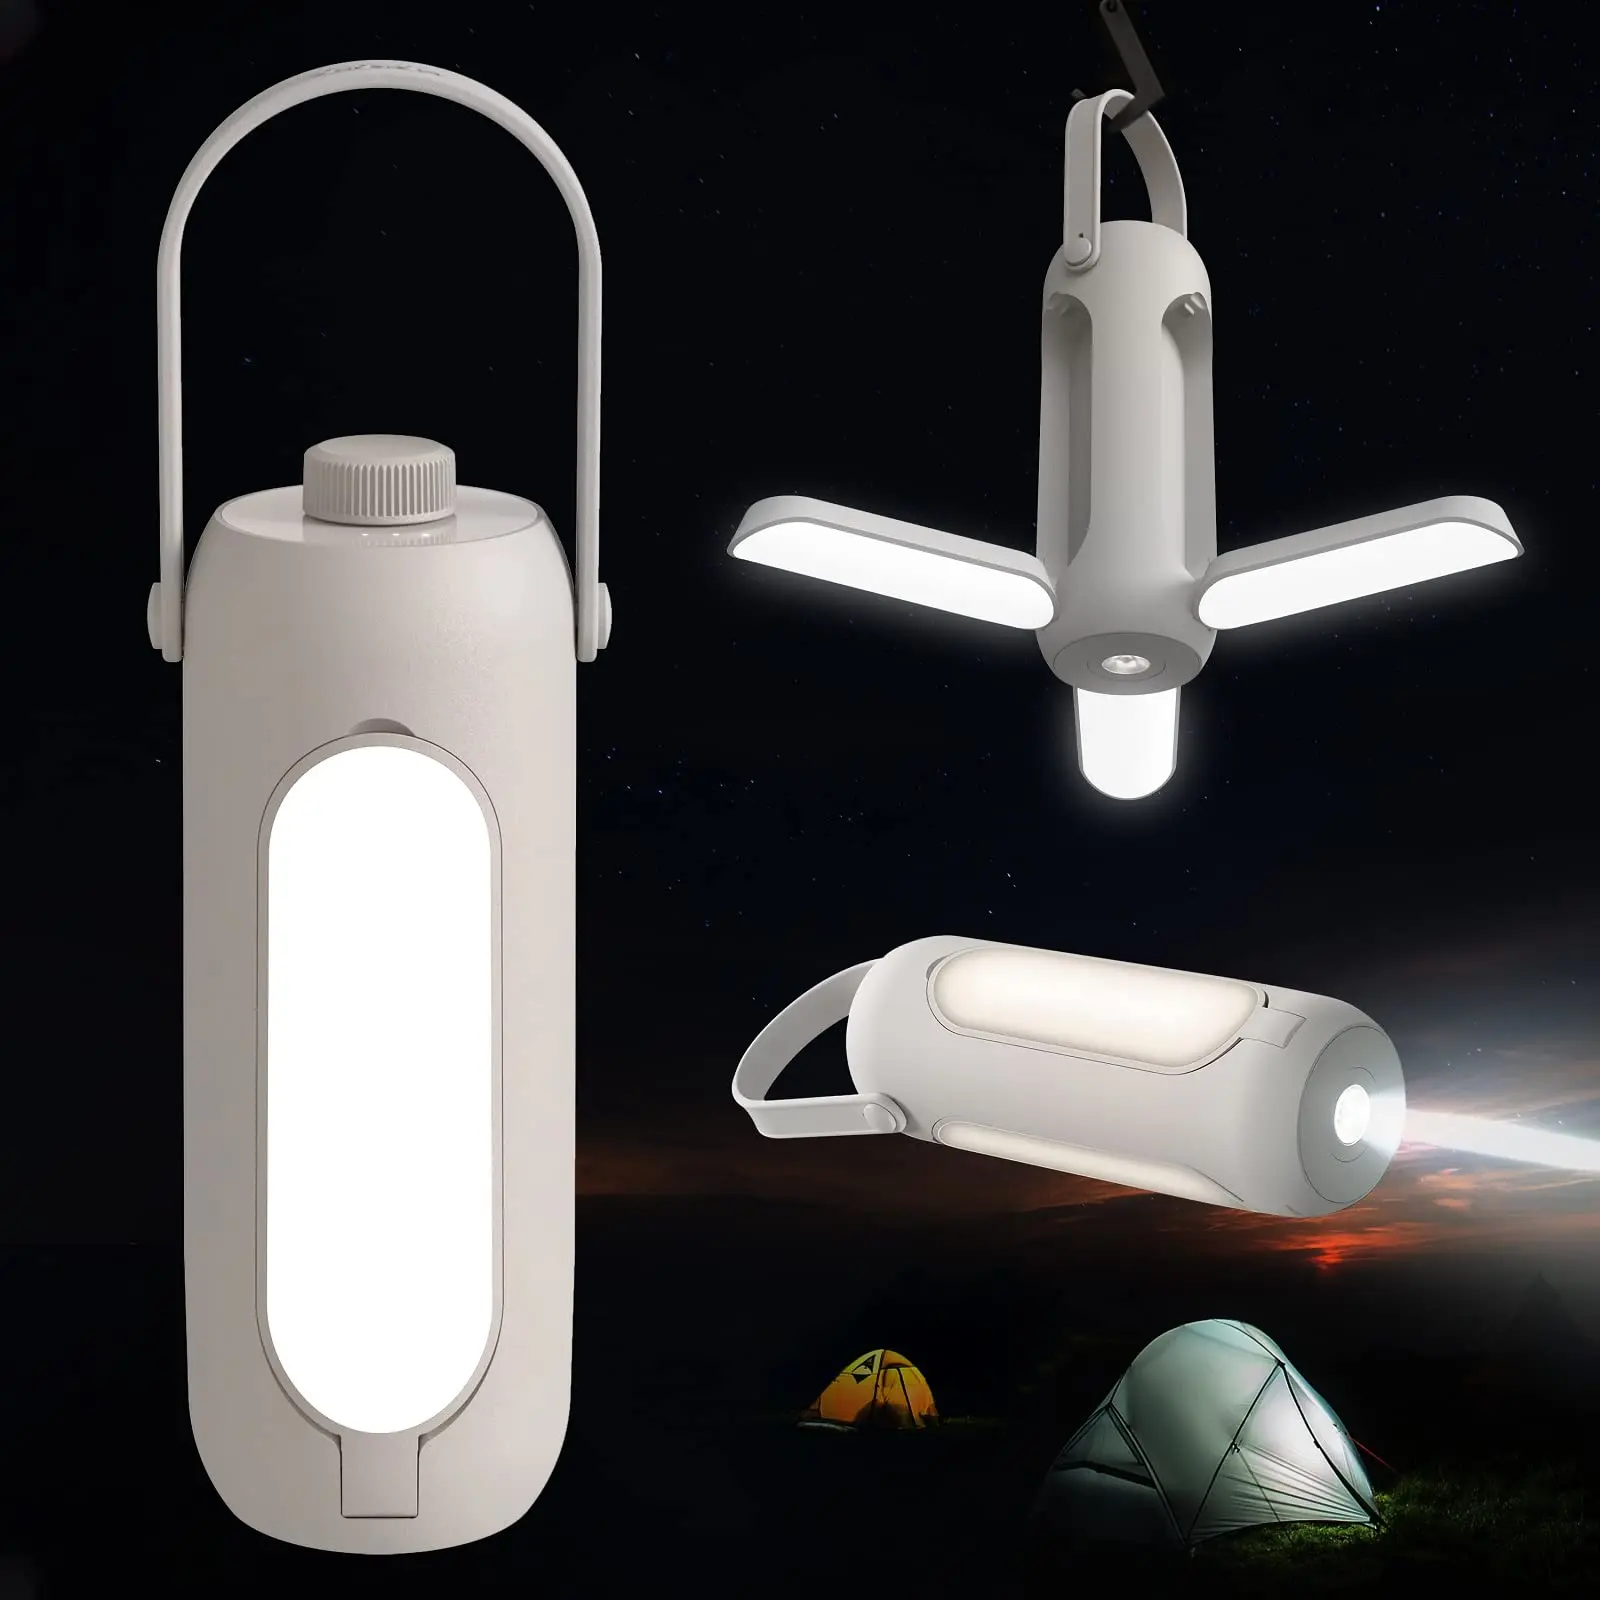 

720LM Outdoor Lighting LED Leaf Camping Lamp Hung Emergency Solar USB Rechargeable Tent Camping Lights Fishing Travel Lanterns